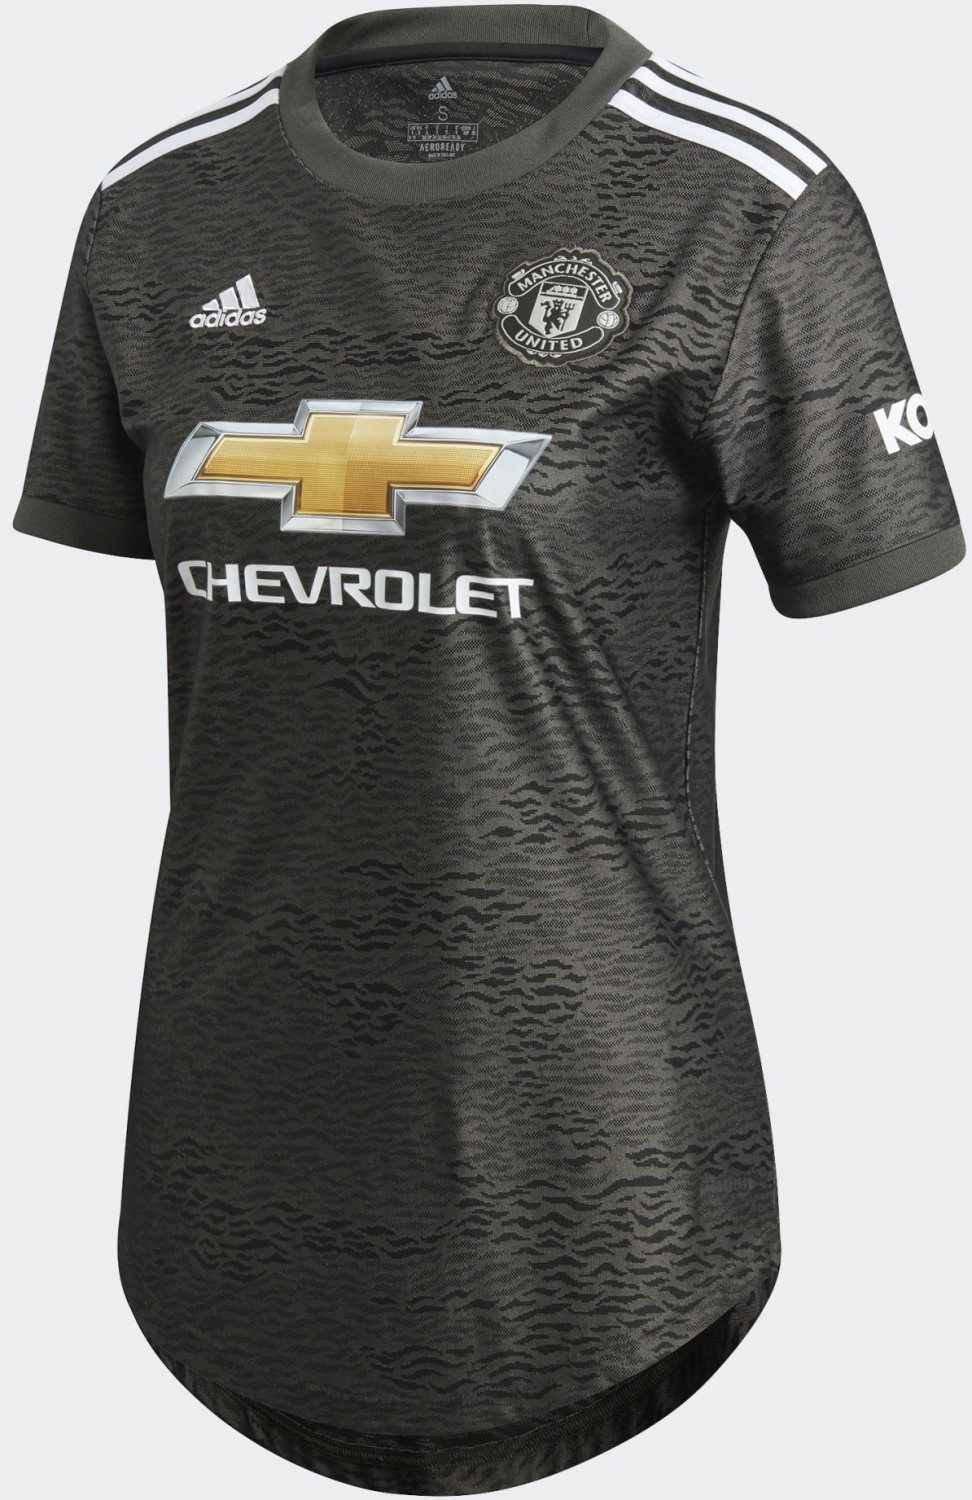 Buy Adidas Manchester United Away Jersey Women 2021 from £52.00 (Today